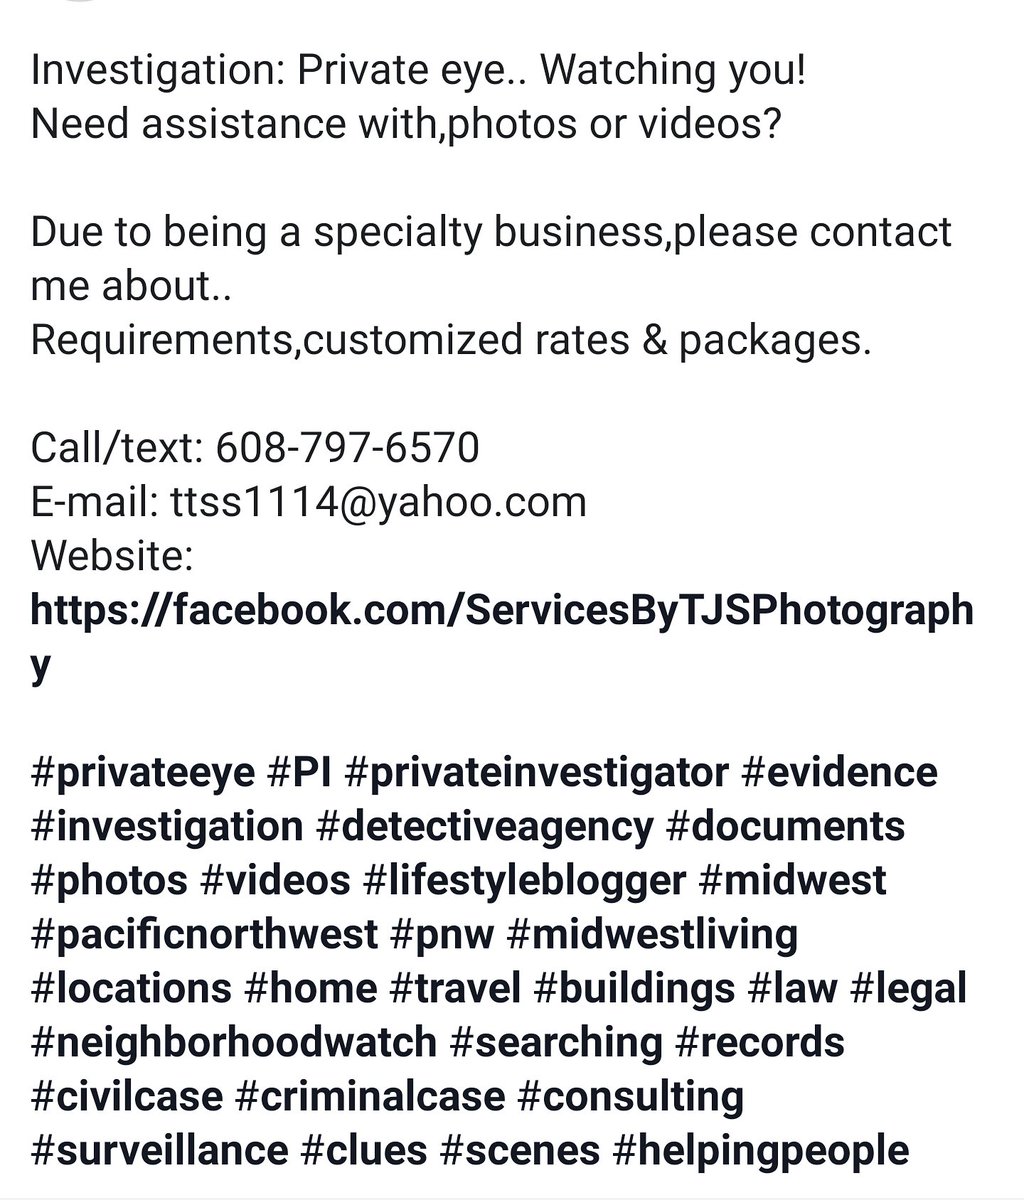 #Investigation: #Privateeye.. Watching you! Details.⤵️

#privateinvestigator #evidence #detectiveagency #document
#photos #video #pnw #midwest #location #law #legal #neighborhoodwatch #search #record #civilcase #criminalcase #consulting #surveillance #clues #scenes #helpingpeople